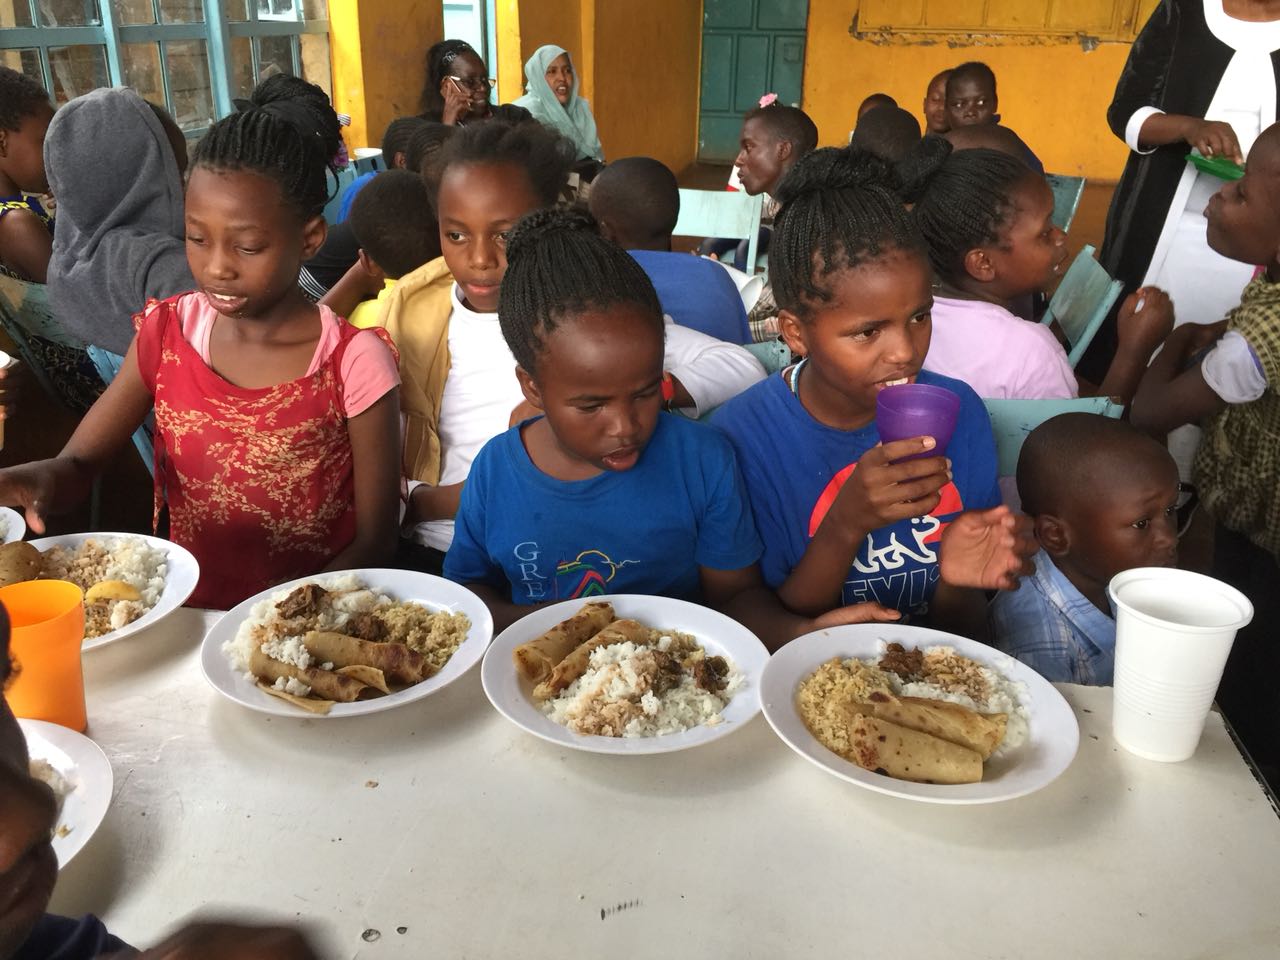 A group of children sitting at a table eating food.